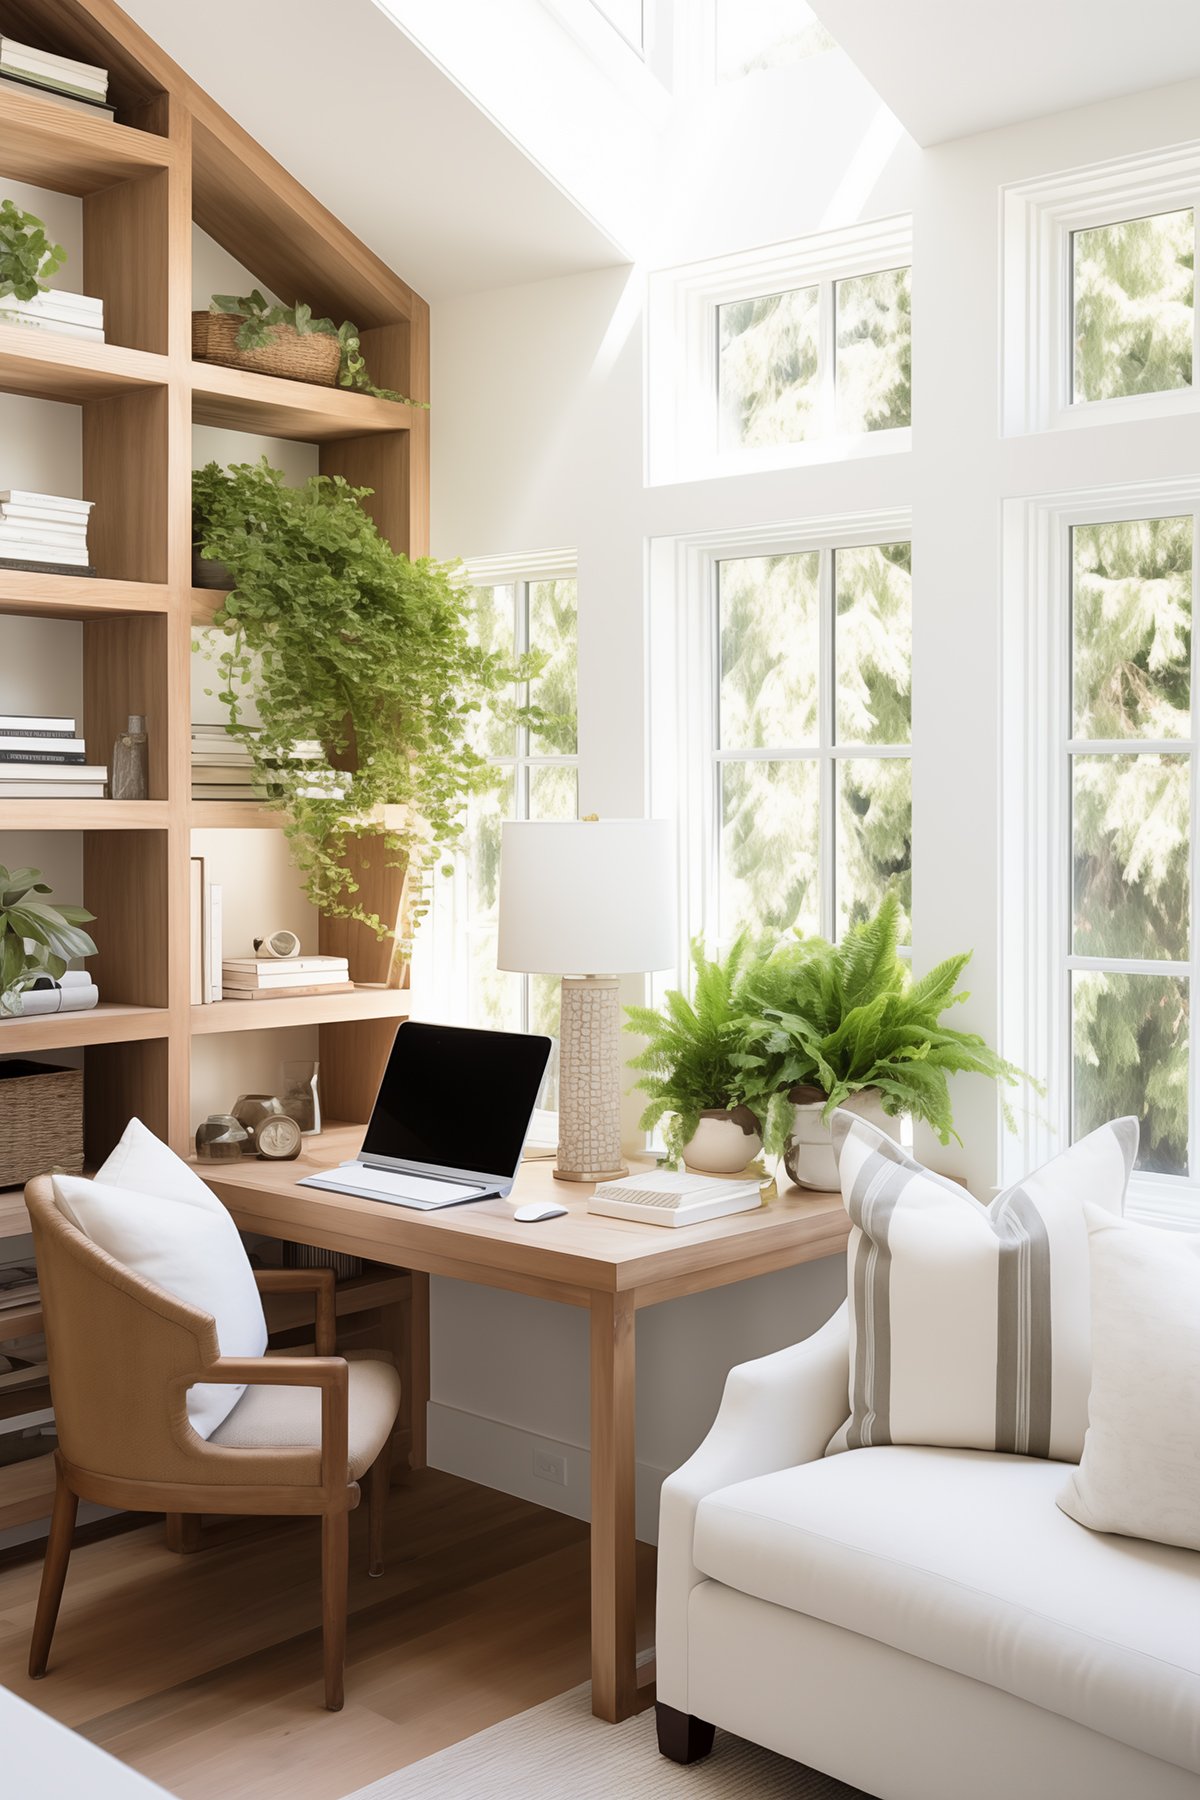 Airy home office with lush plants, wooden furniture, and large windows with a garden view.